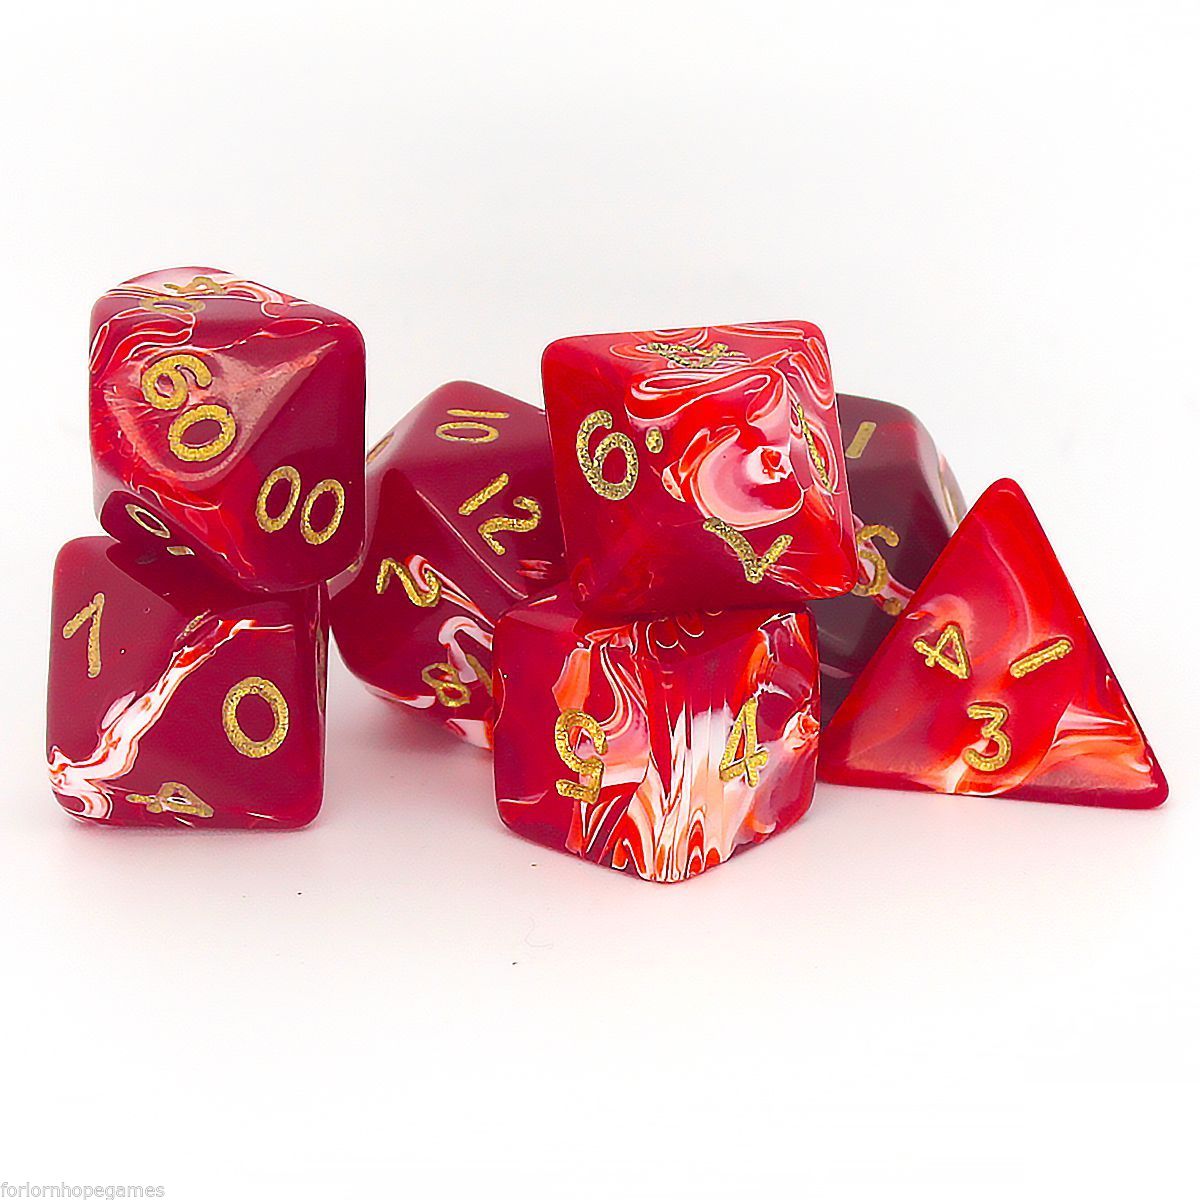 D20 Polyhedral 7 Piece Dice Set - Marble - Cherry Cream (Red)